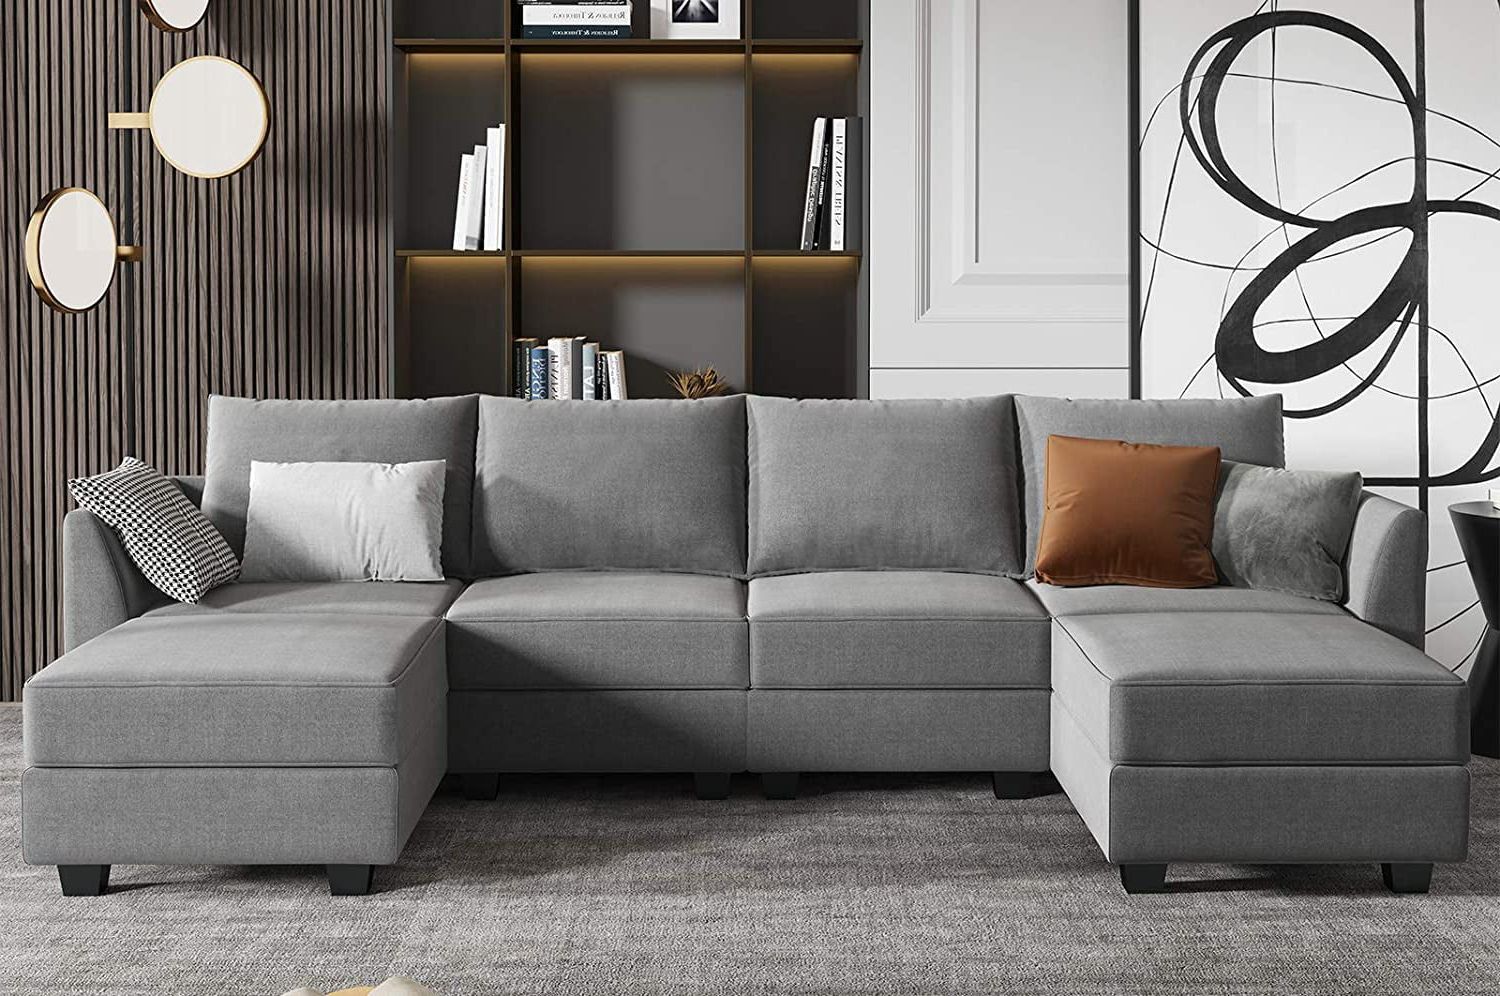 Honbay Modular Sectional Sofa U Shaped Couch With Reversible Chaise For Modern U Shape Sectional Sofas In Gray (View 4 of 20)